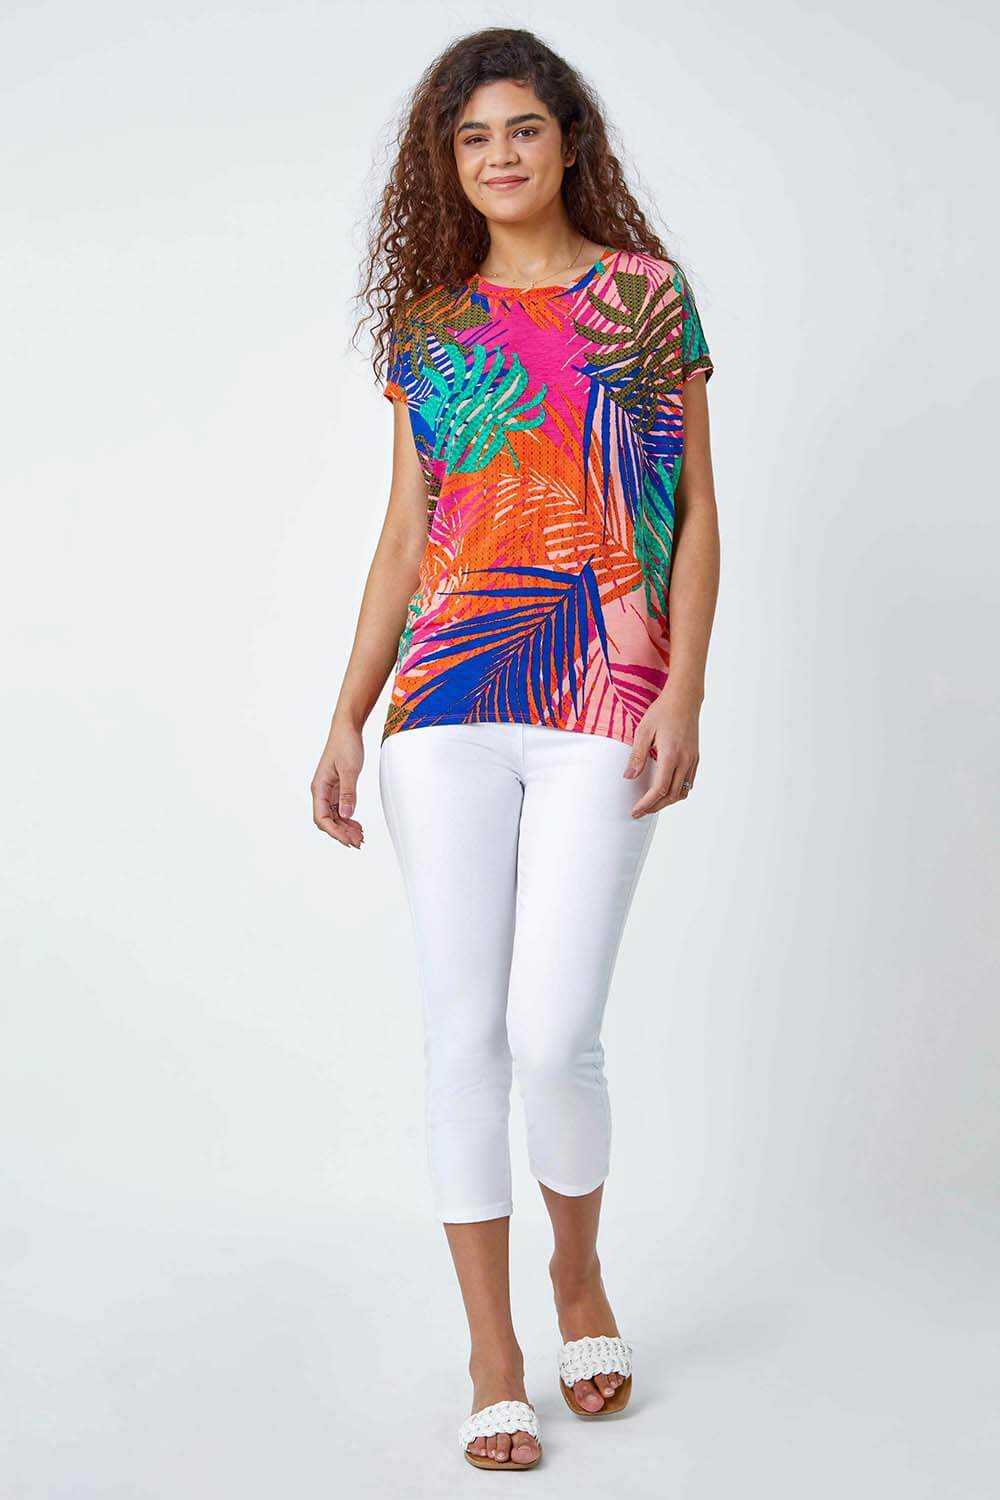 PINK Tropical Print Cocoon Stretch Top, Image 2 of 5